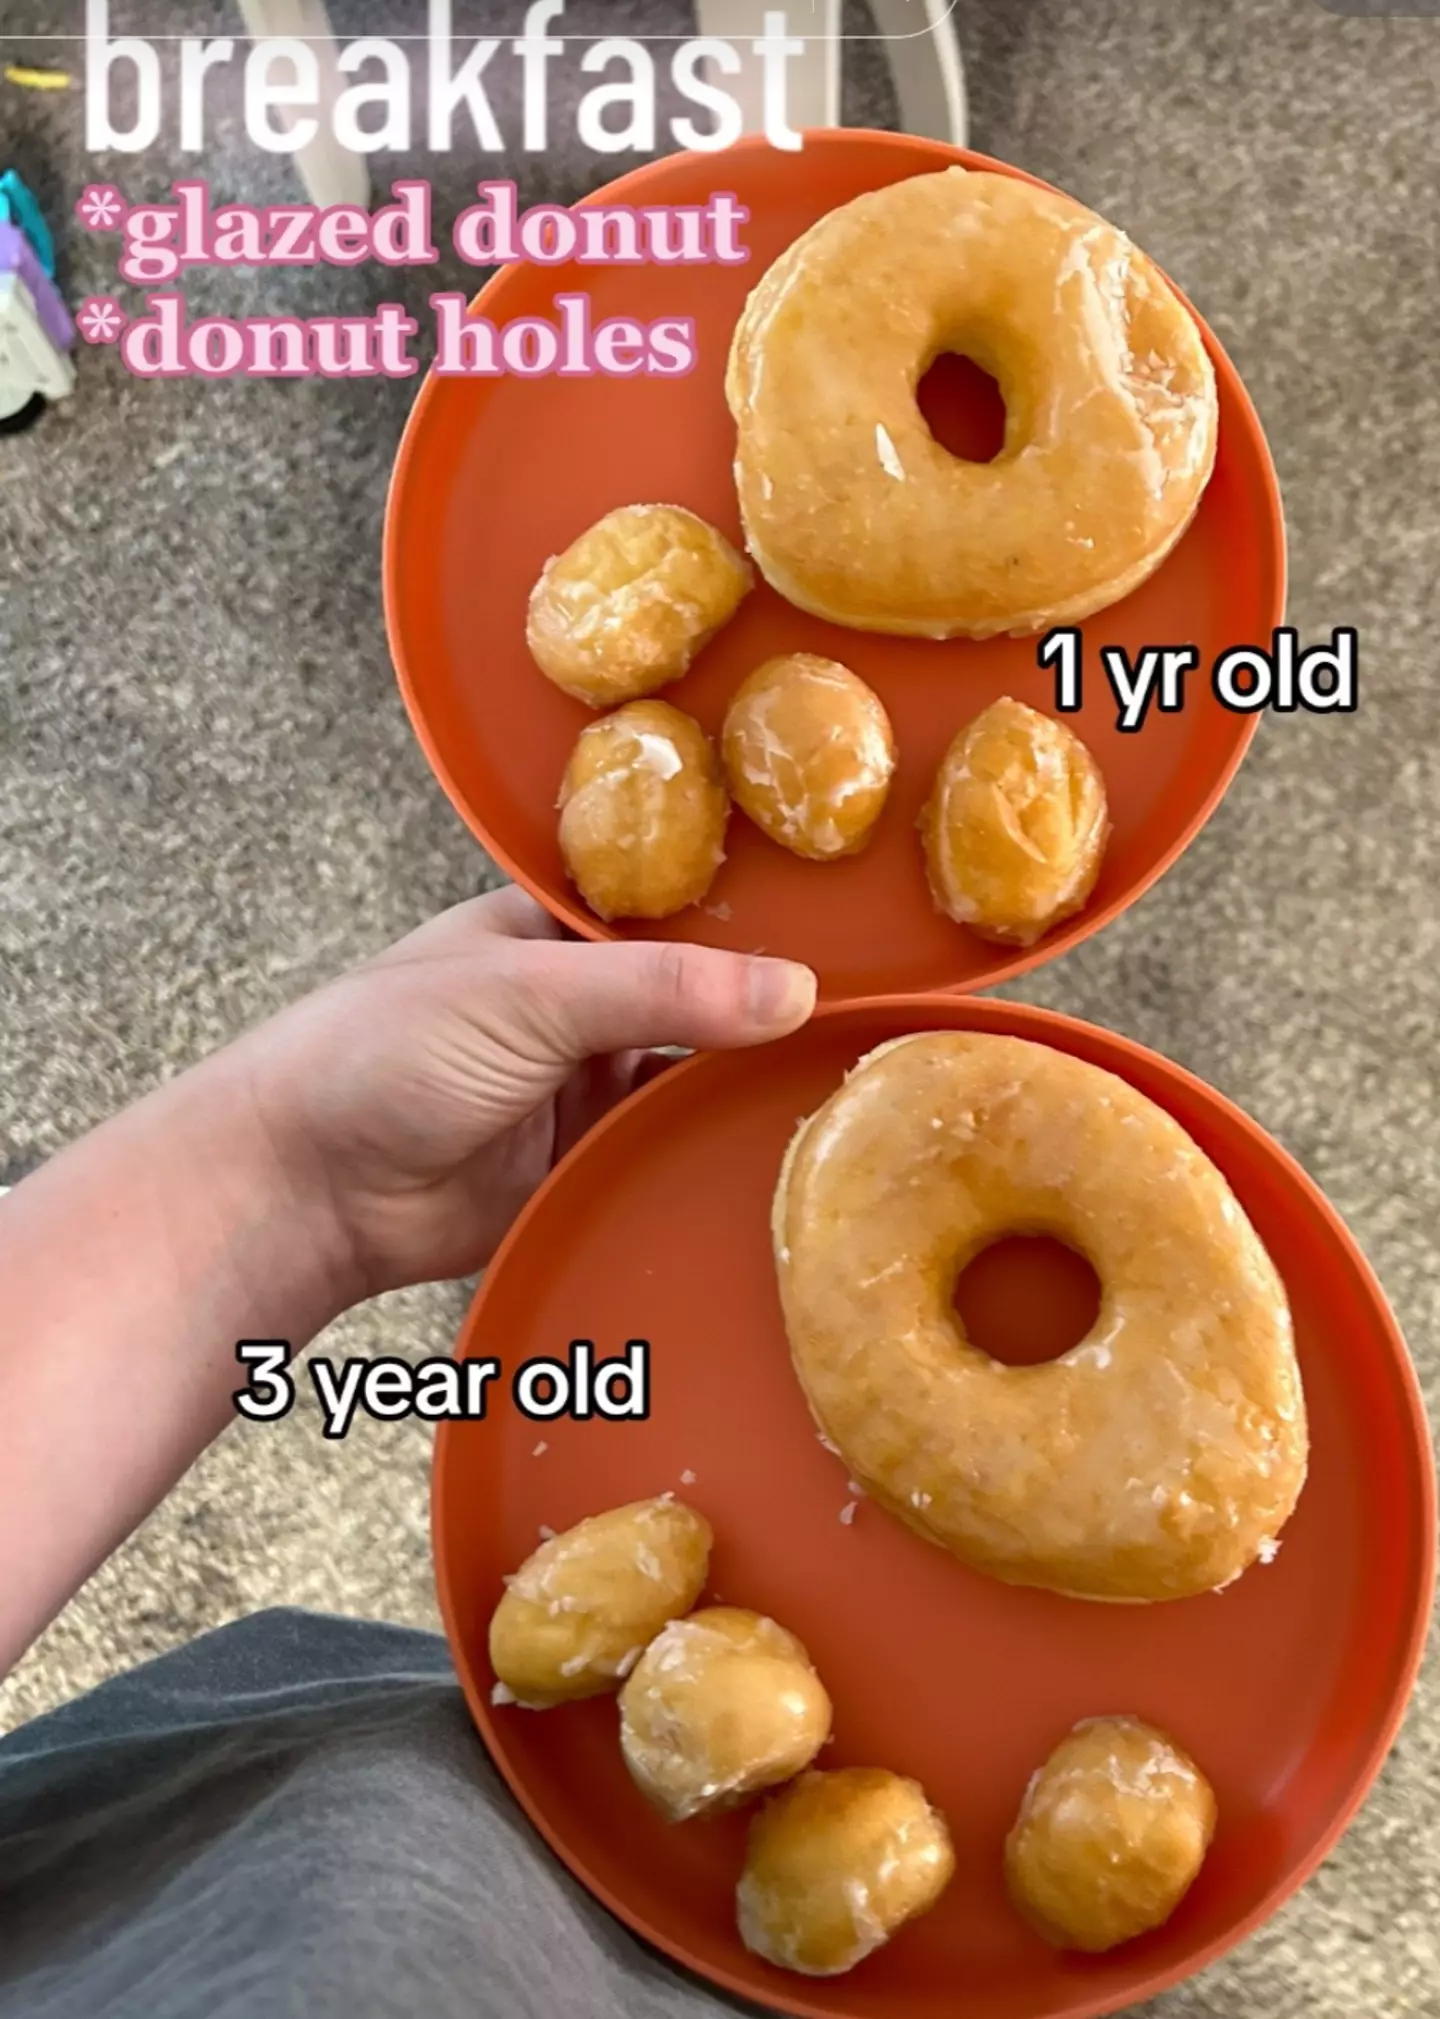 The children had doughnuts with a side of mini doughnuts for breakfast.